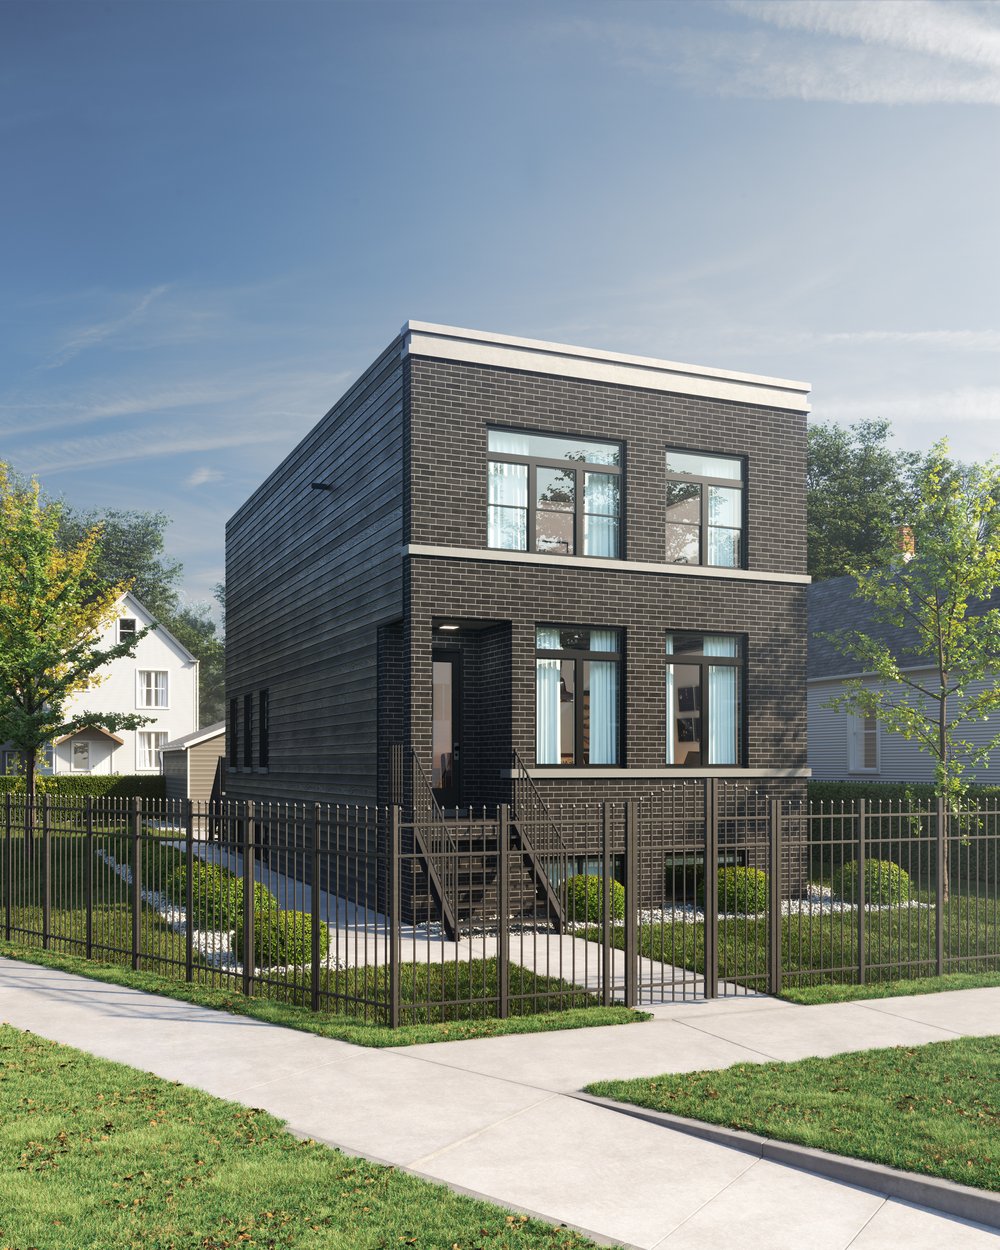 Single Family New Construction Home with Black Brick and Black Trim